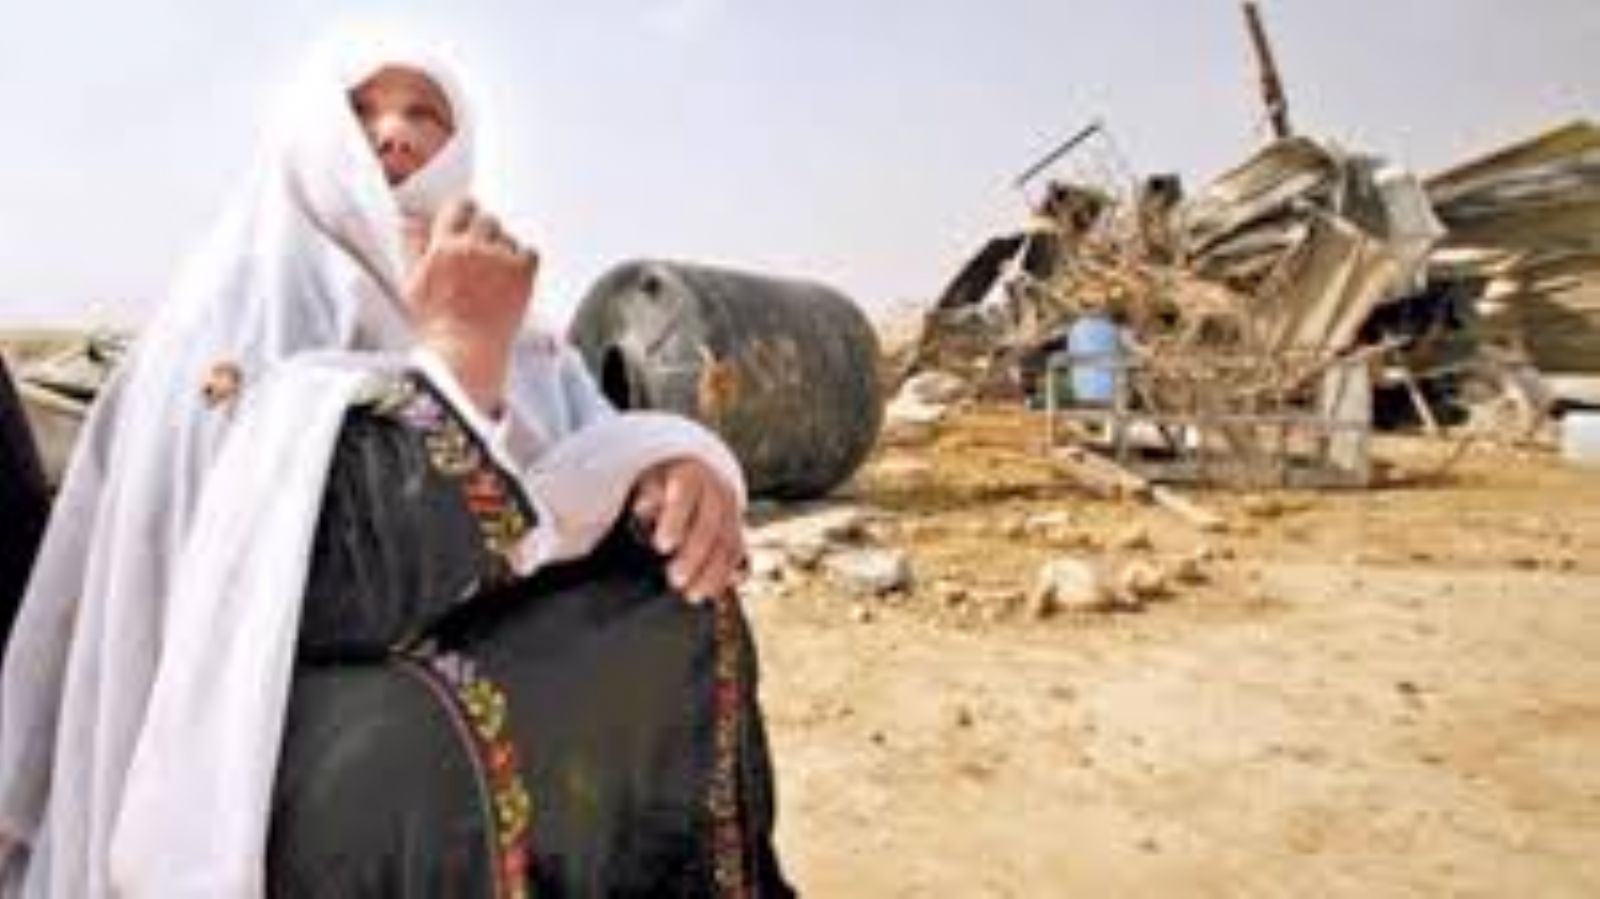 uptick in number of Bedouin structures demolished in Israel last year